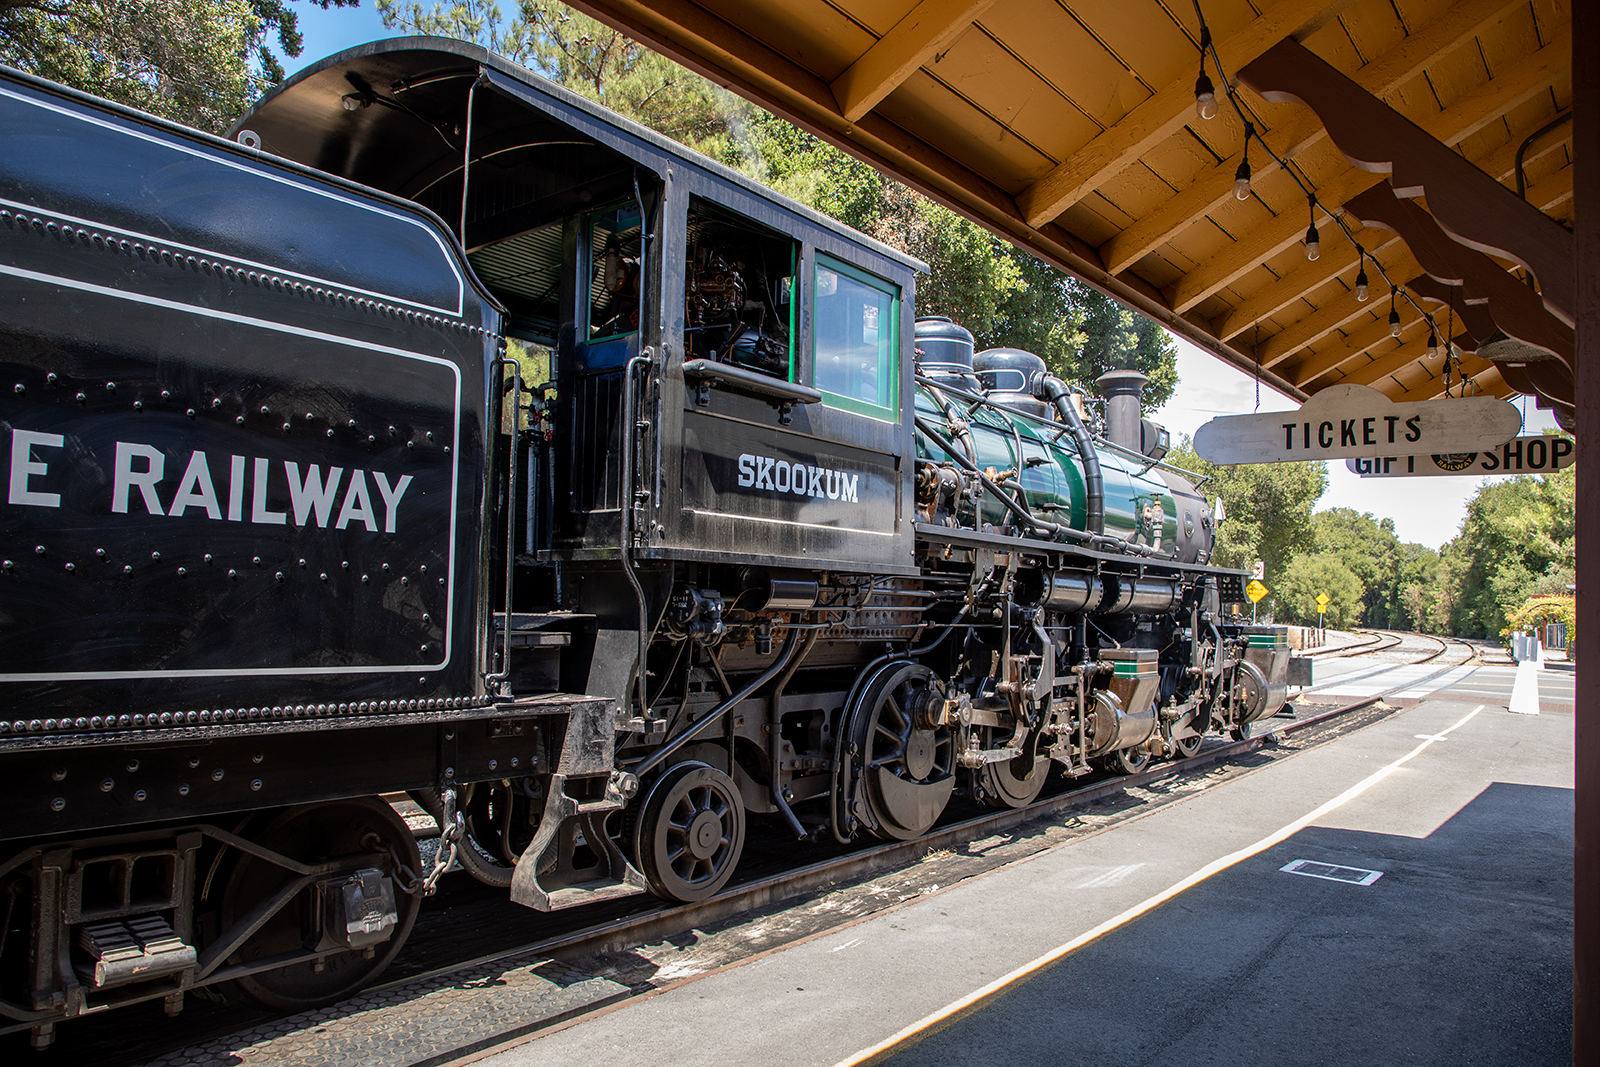 A large steam locomotive originally from the Columbia River Belt Line Railway sits in front of the museum's train station.